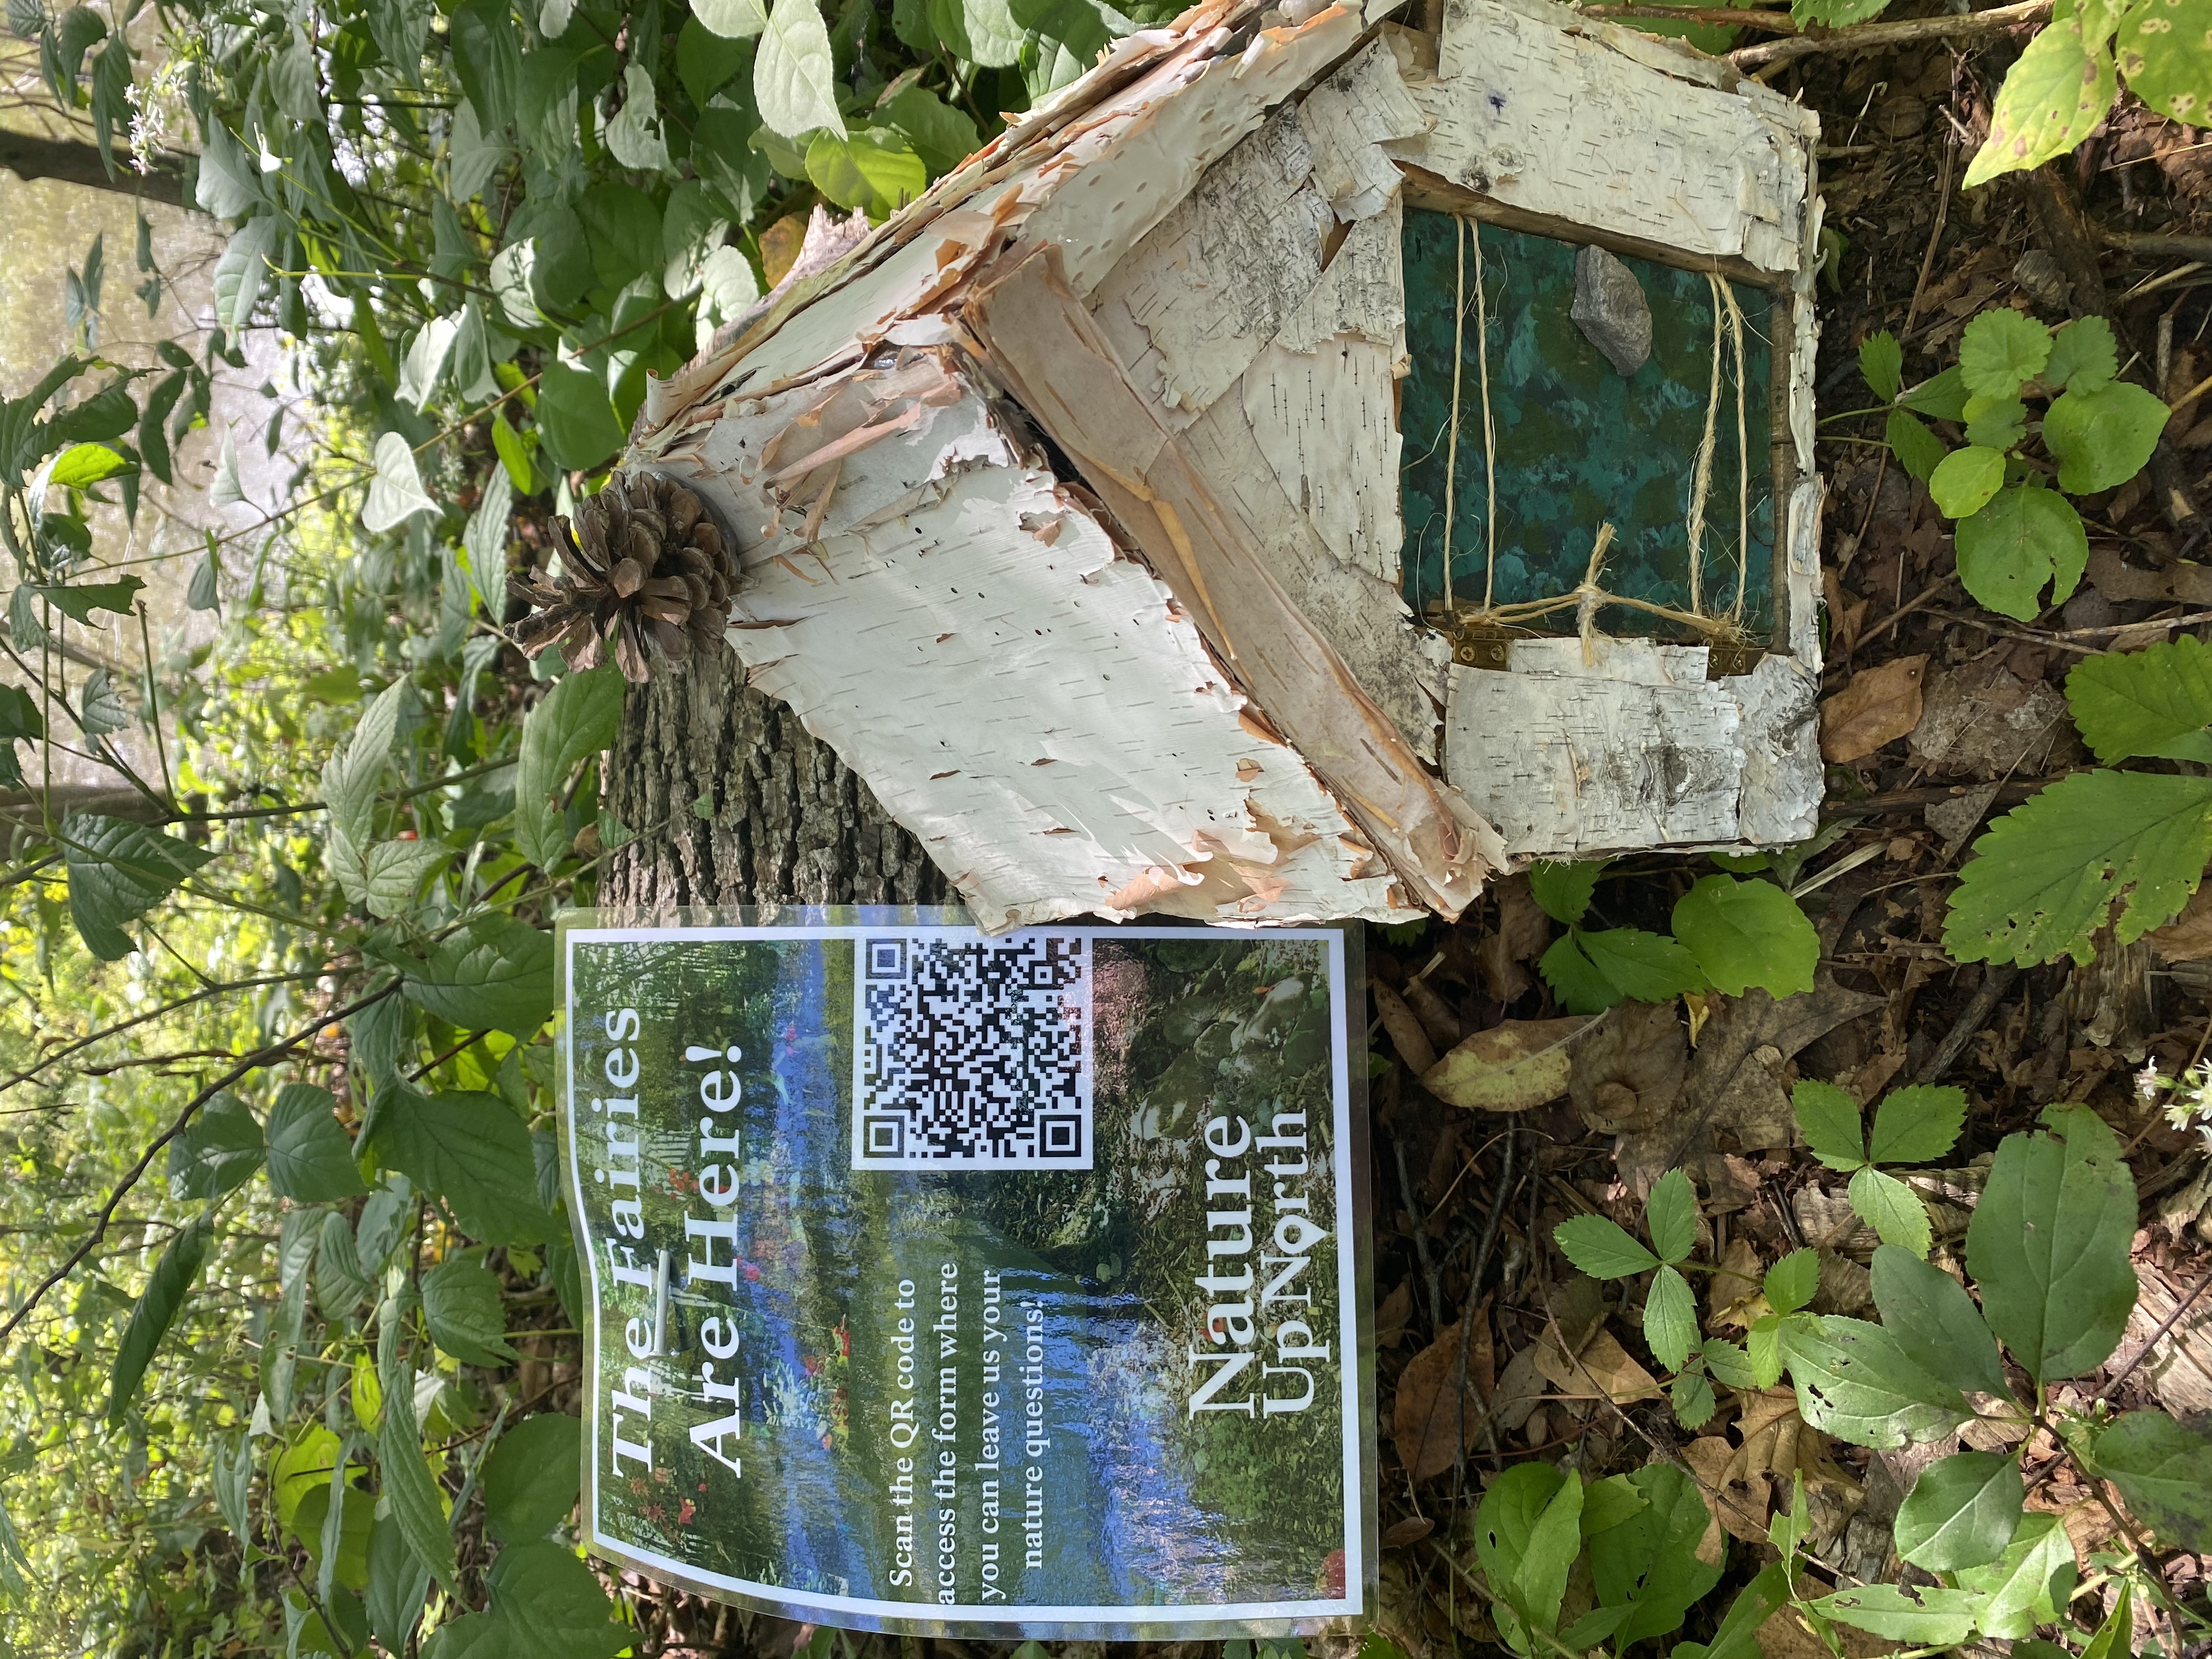 White paper-birch covered fairy house resting against log with poster nailed to log next to it